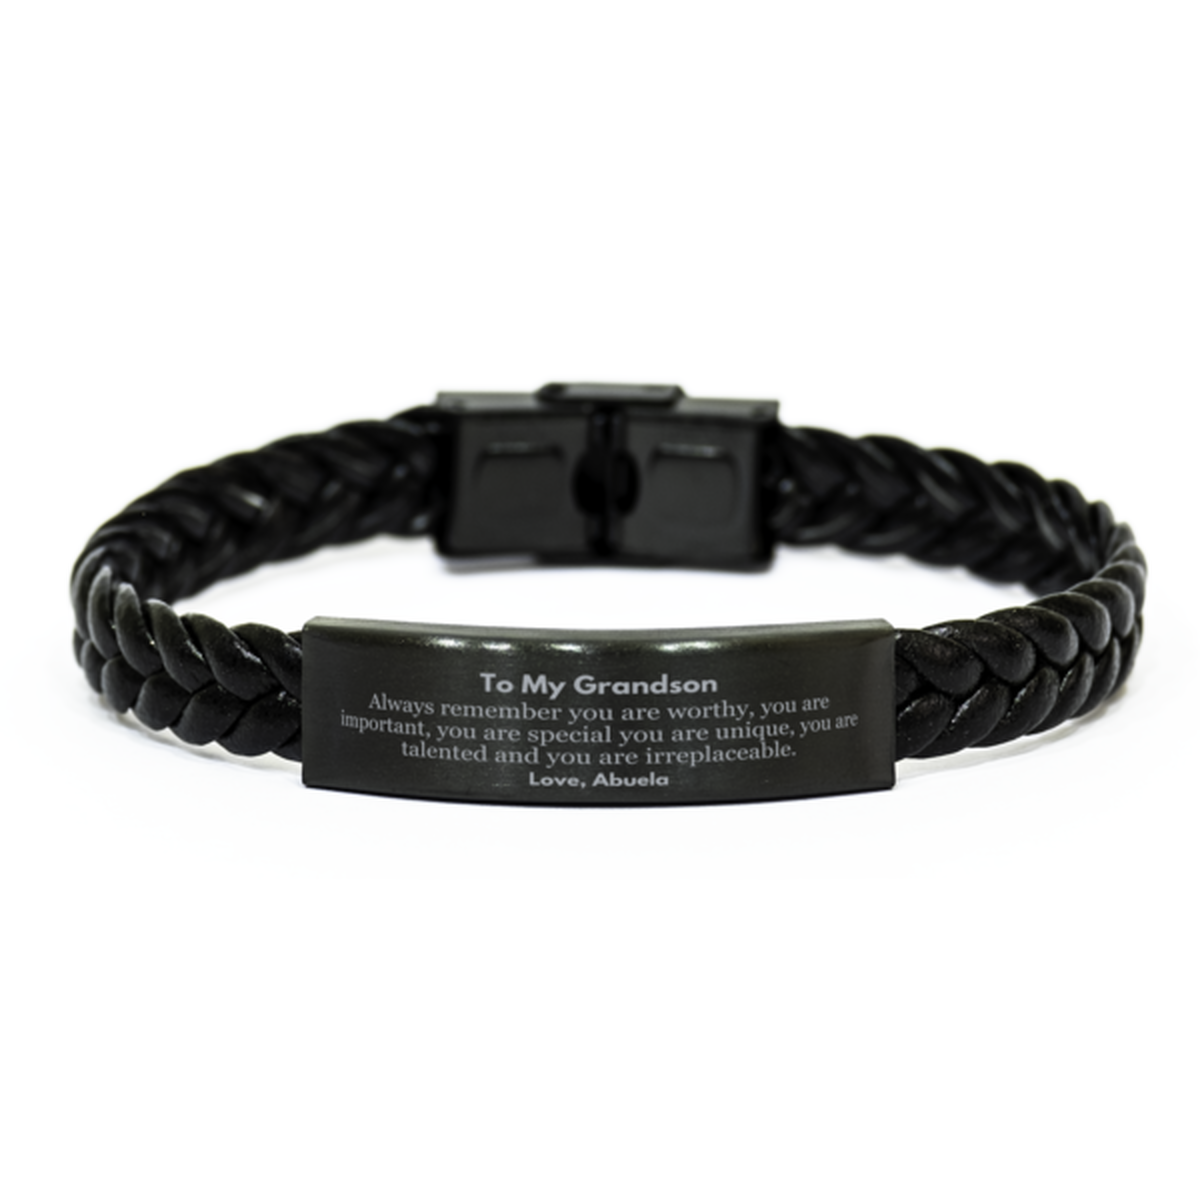 Grandson Birthday Gifts from Abuela, Inspirational Braided Leather Bracelet for Grandson Christmas Graduation Gifts for Grandson Always remember you are worthy, you are important. Love, Abuela